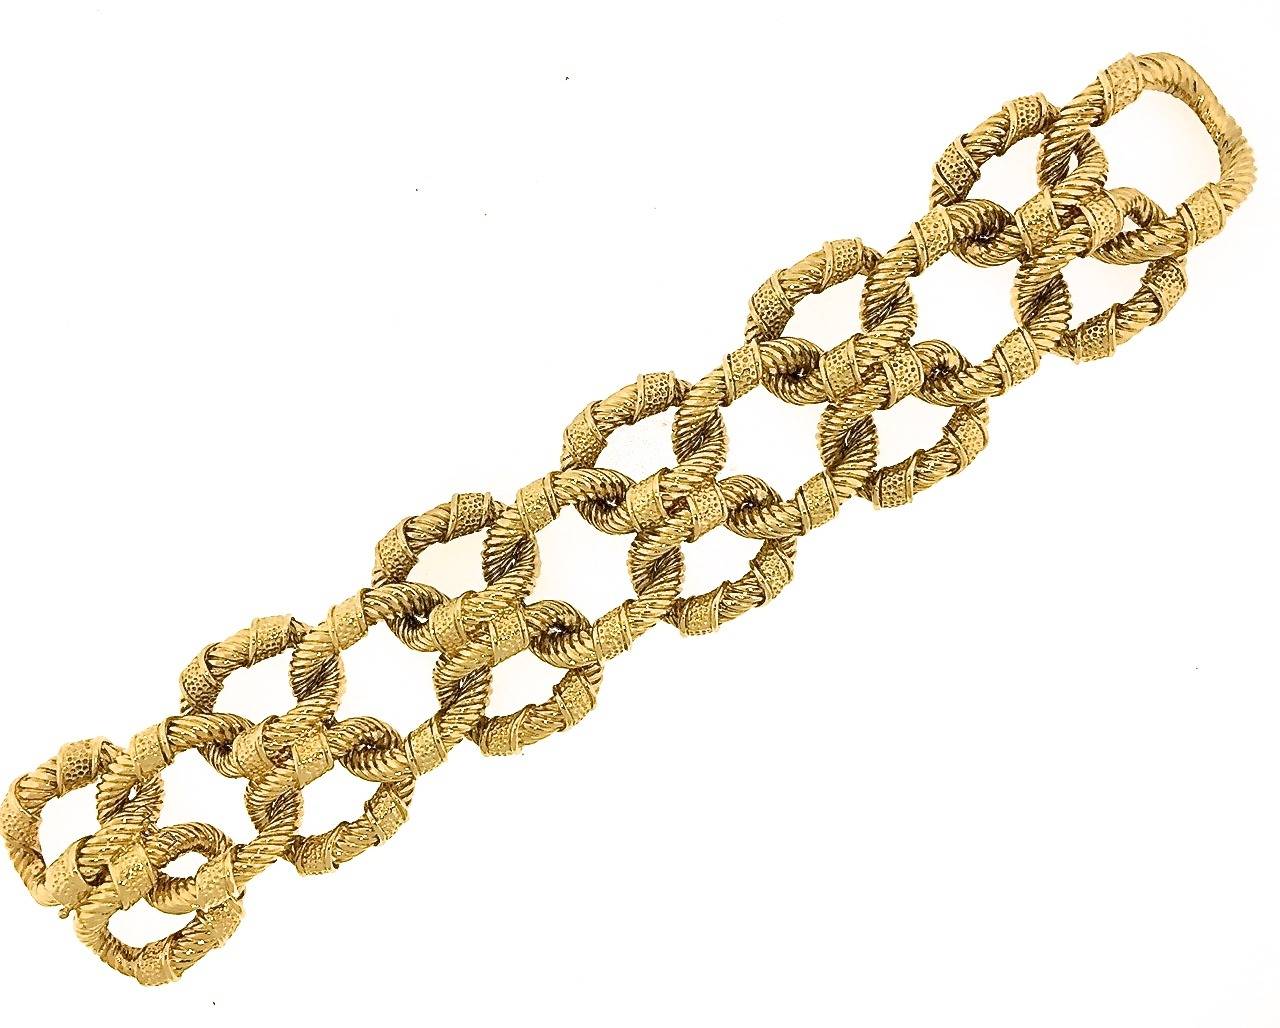 Van Cleef & Arpels 18k gold bracelet designed as a double row of joined, oval, textured gold links alternating with larger, oval, textured gold links. Each link is embellished with two textures; a ribbed striated finish wrapped in ribbons of gold